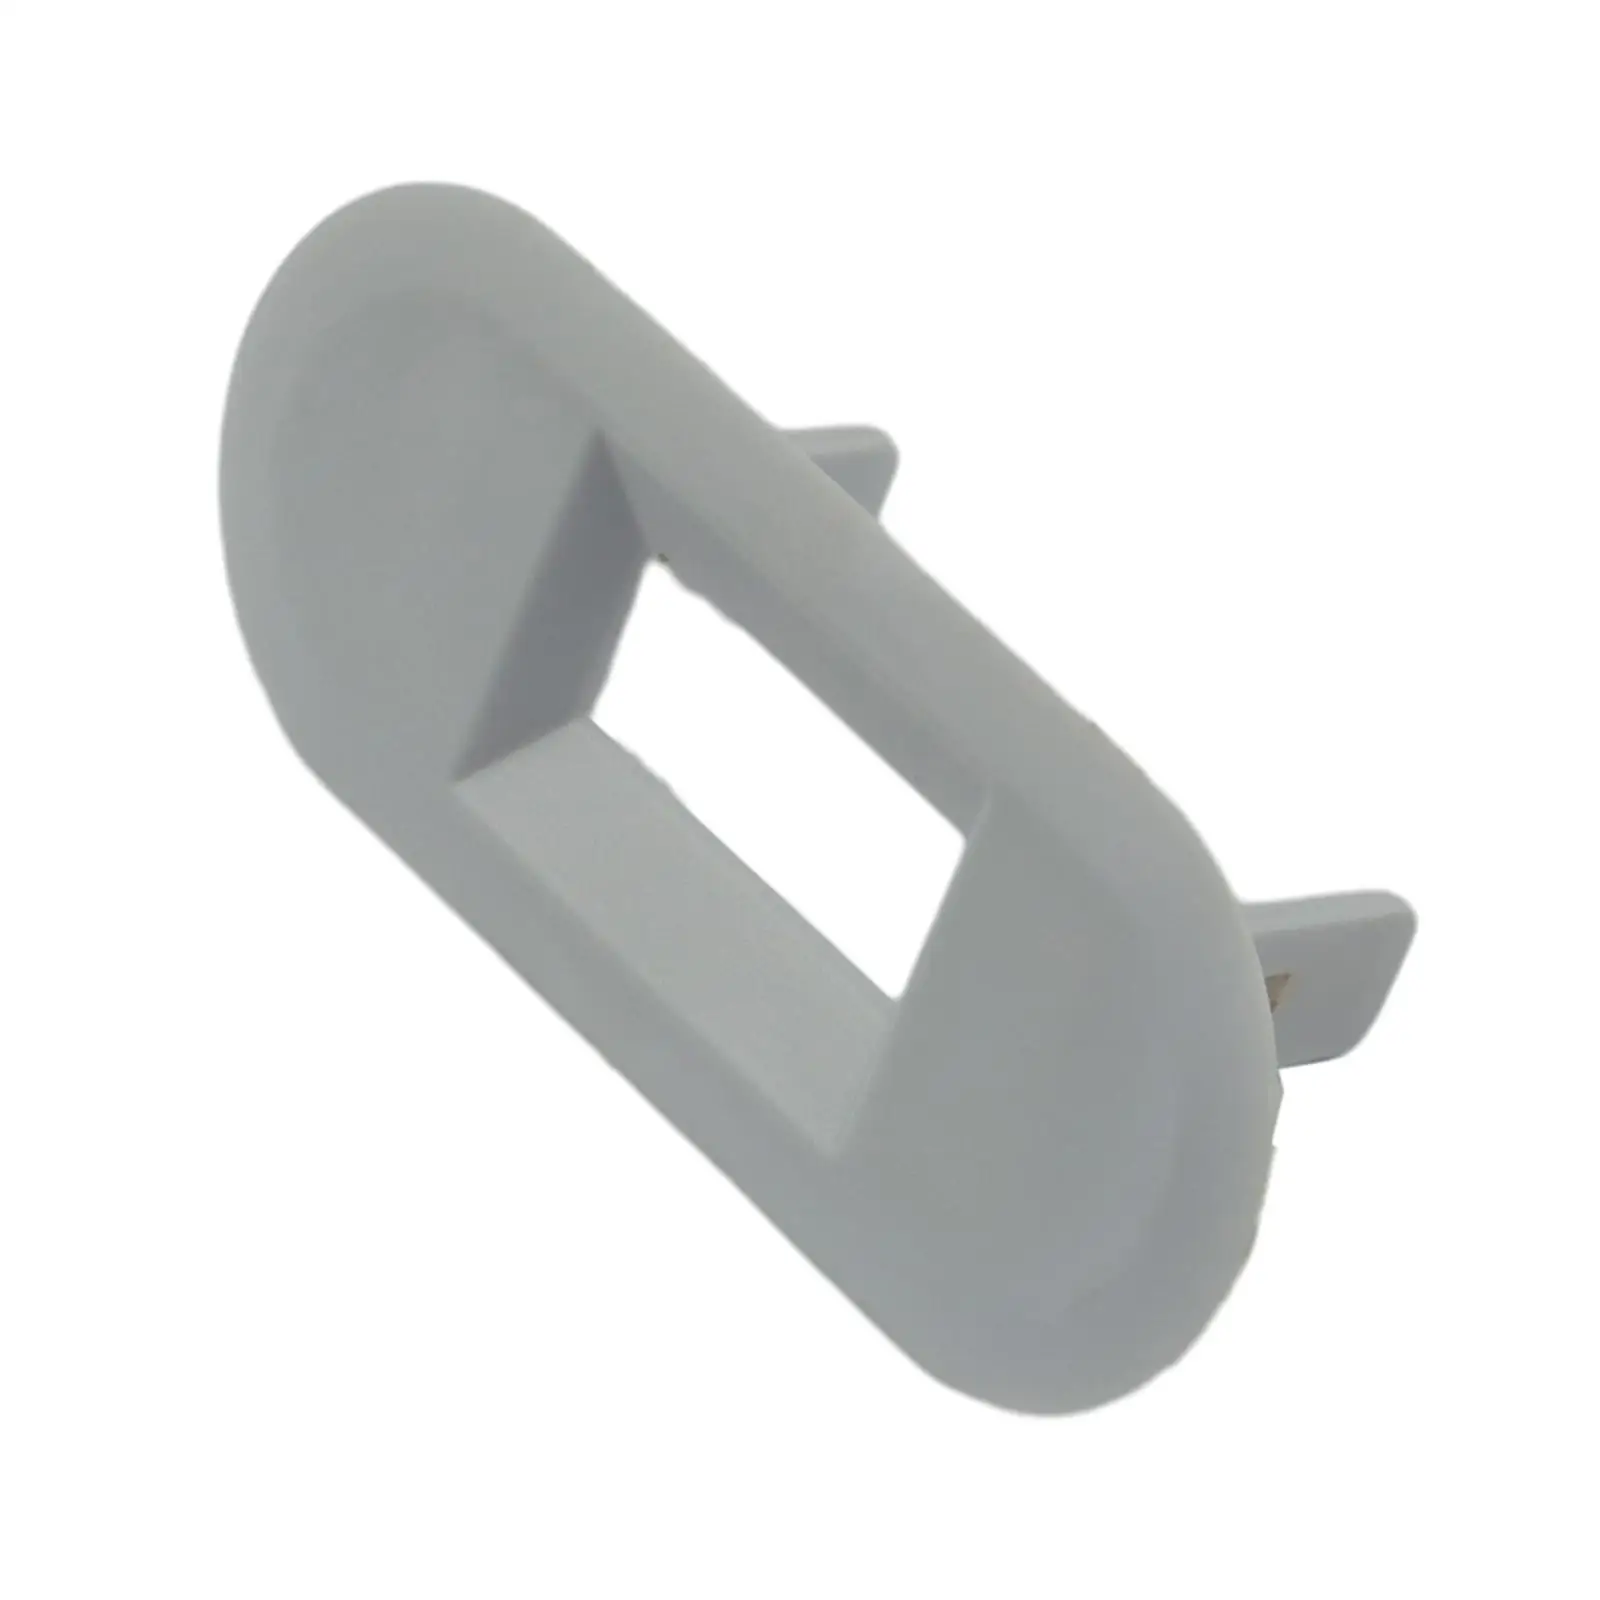 Washer Lid Lock Bezel Washer Parts ,Sturdy ,Easy to Install, Durable Washer